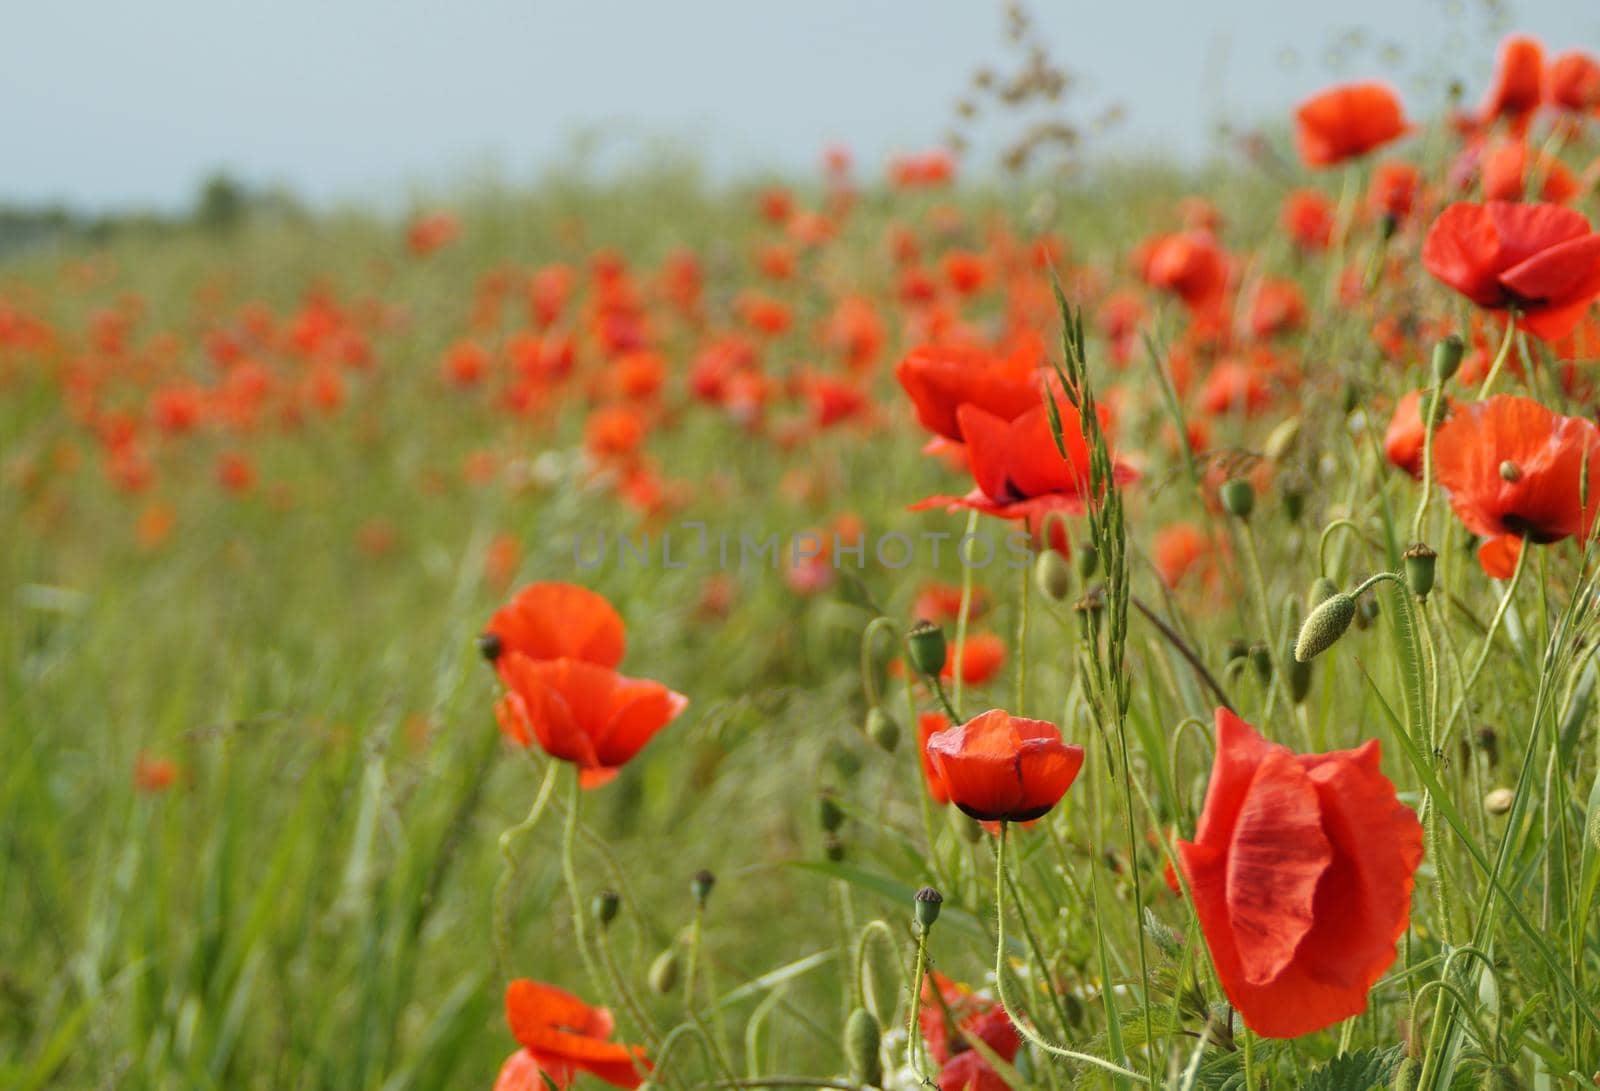 The wind made the poppies (papaver rhoeas) and grass strong moving. The photo is taken in East Frisia, Germany. Lots of farmers plant poppies at the rim of their fields to attract bees. 